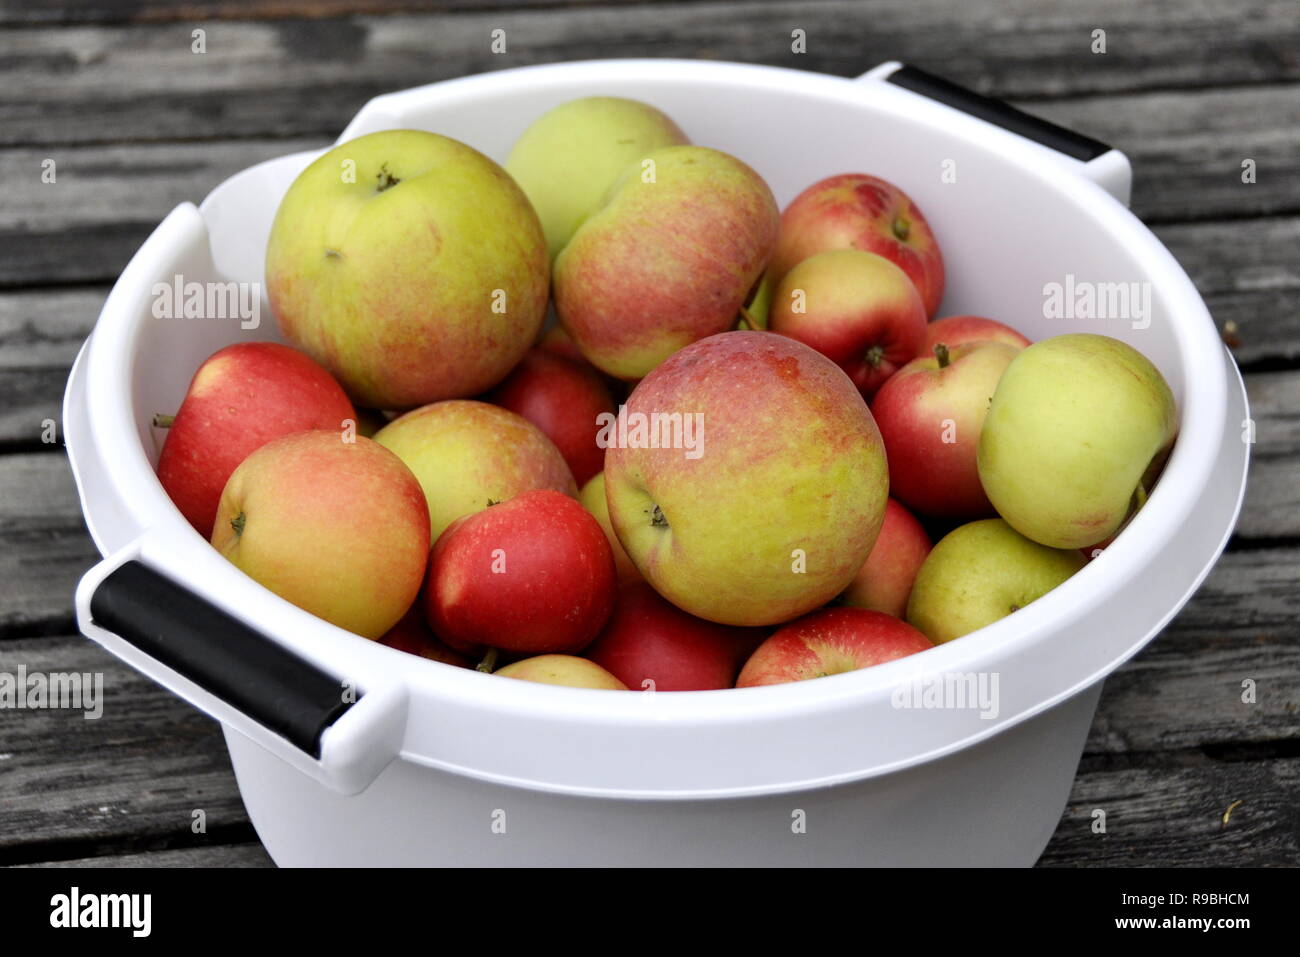 Red and green newly picked apples in a bowl Stock Photo